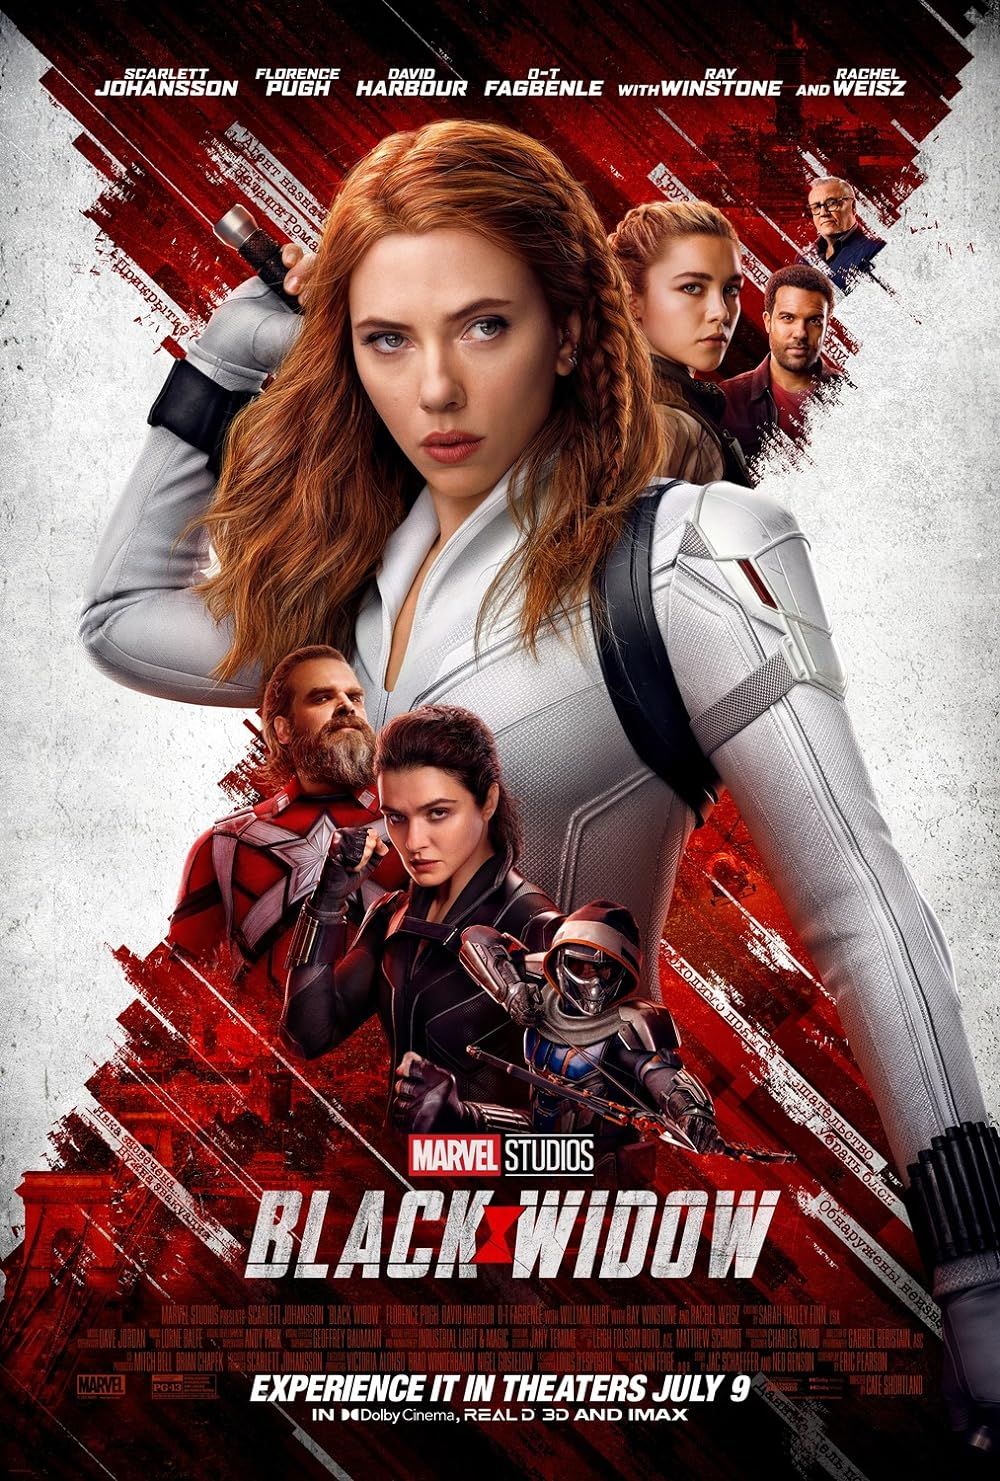 Natasha Romanoff and the cast on the poster for Black Widow